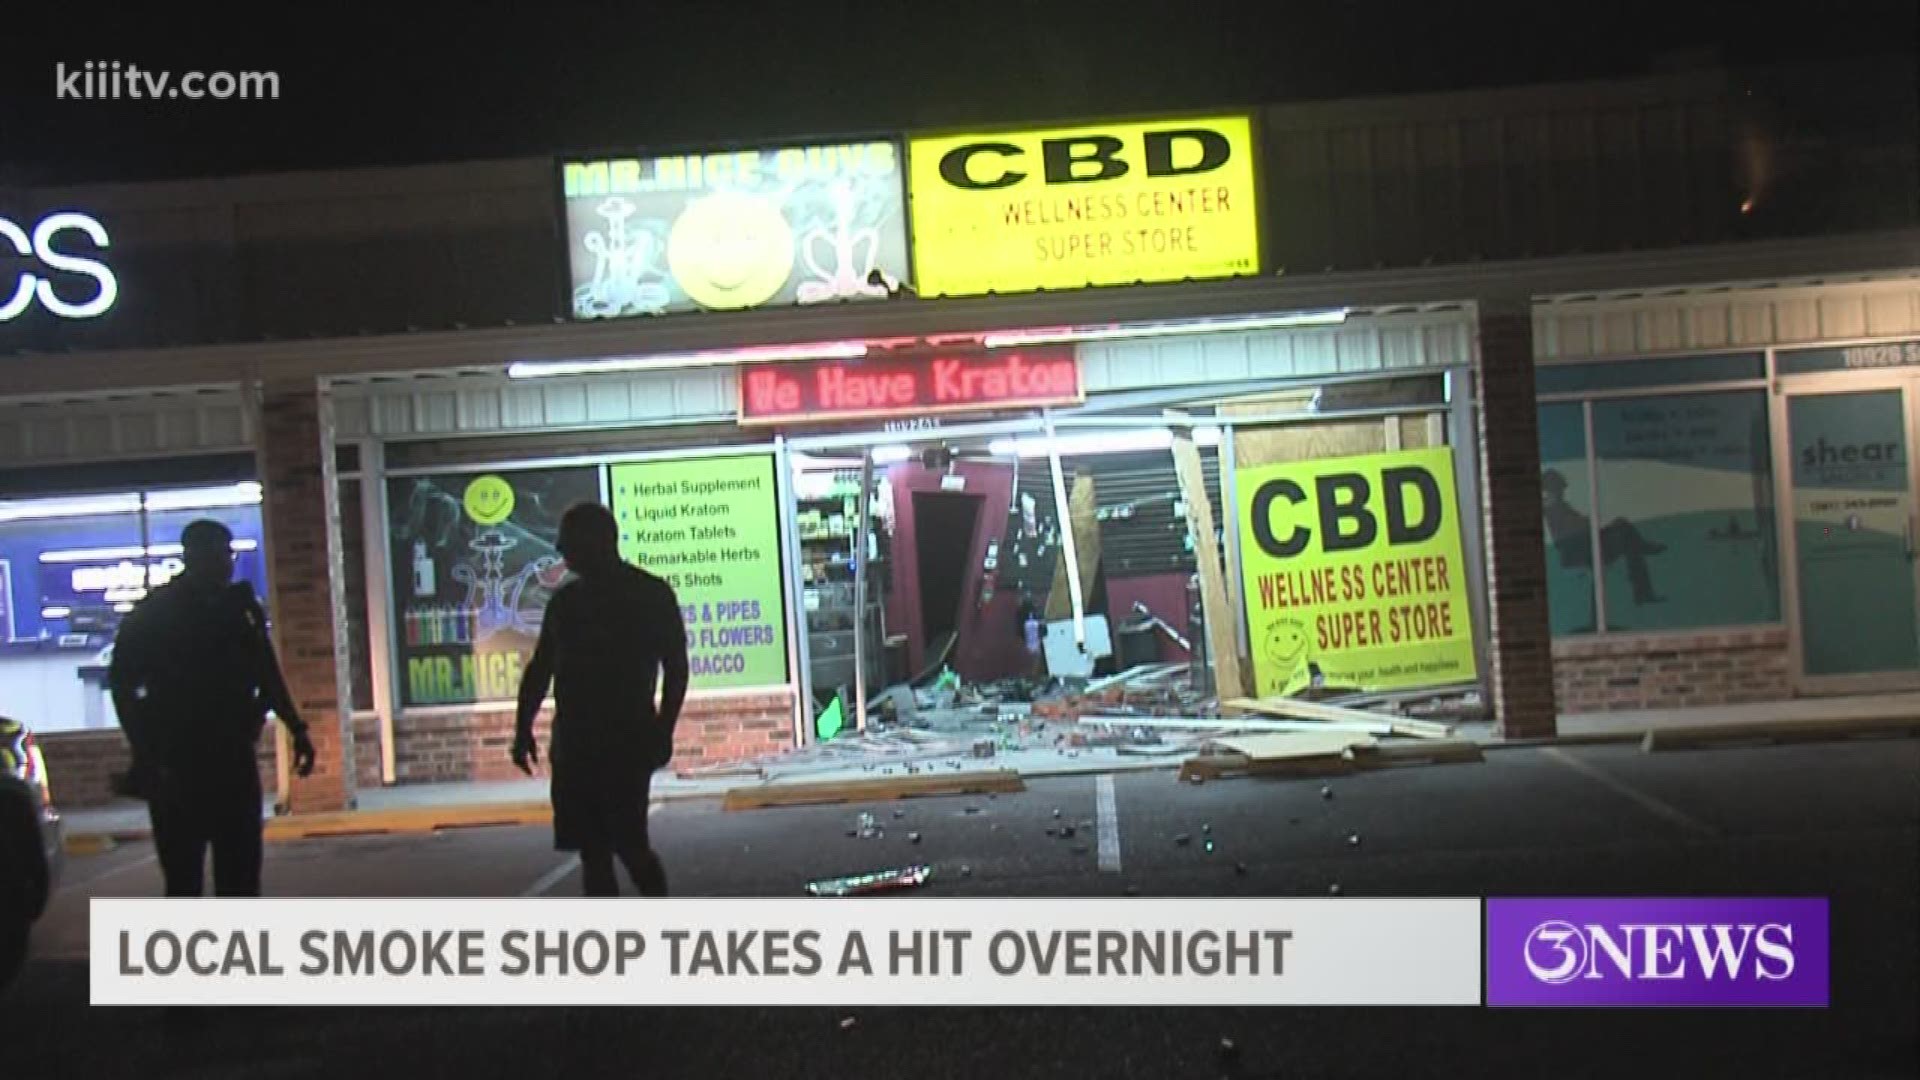 Corpus Christi police were called to the Mr. Nice Guys smoke shop on Leopard Street and McKenzie just after 6 a.m. Thursday to find the front of the store smashed in